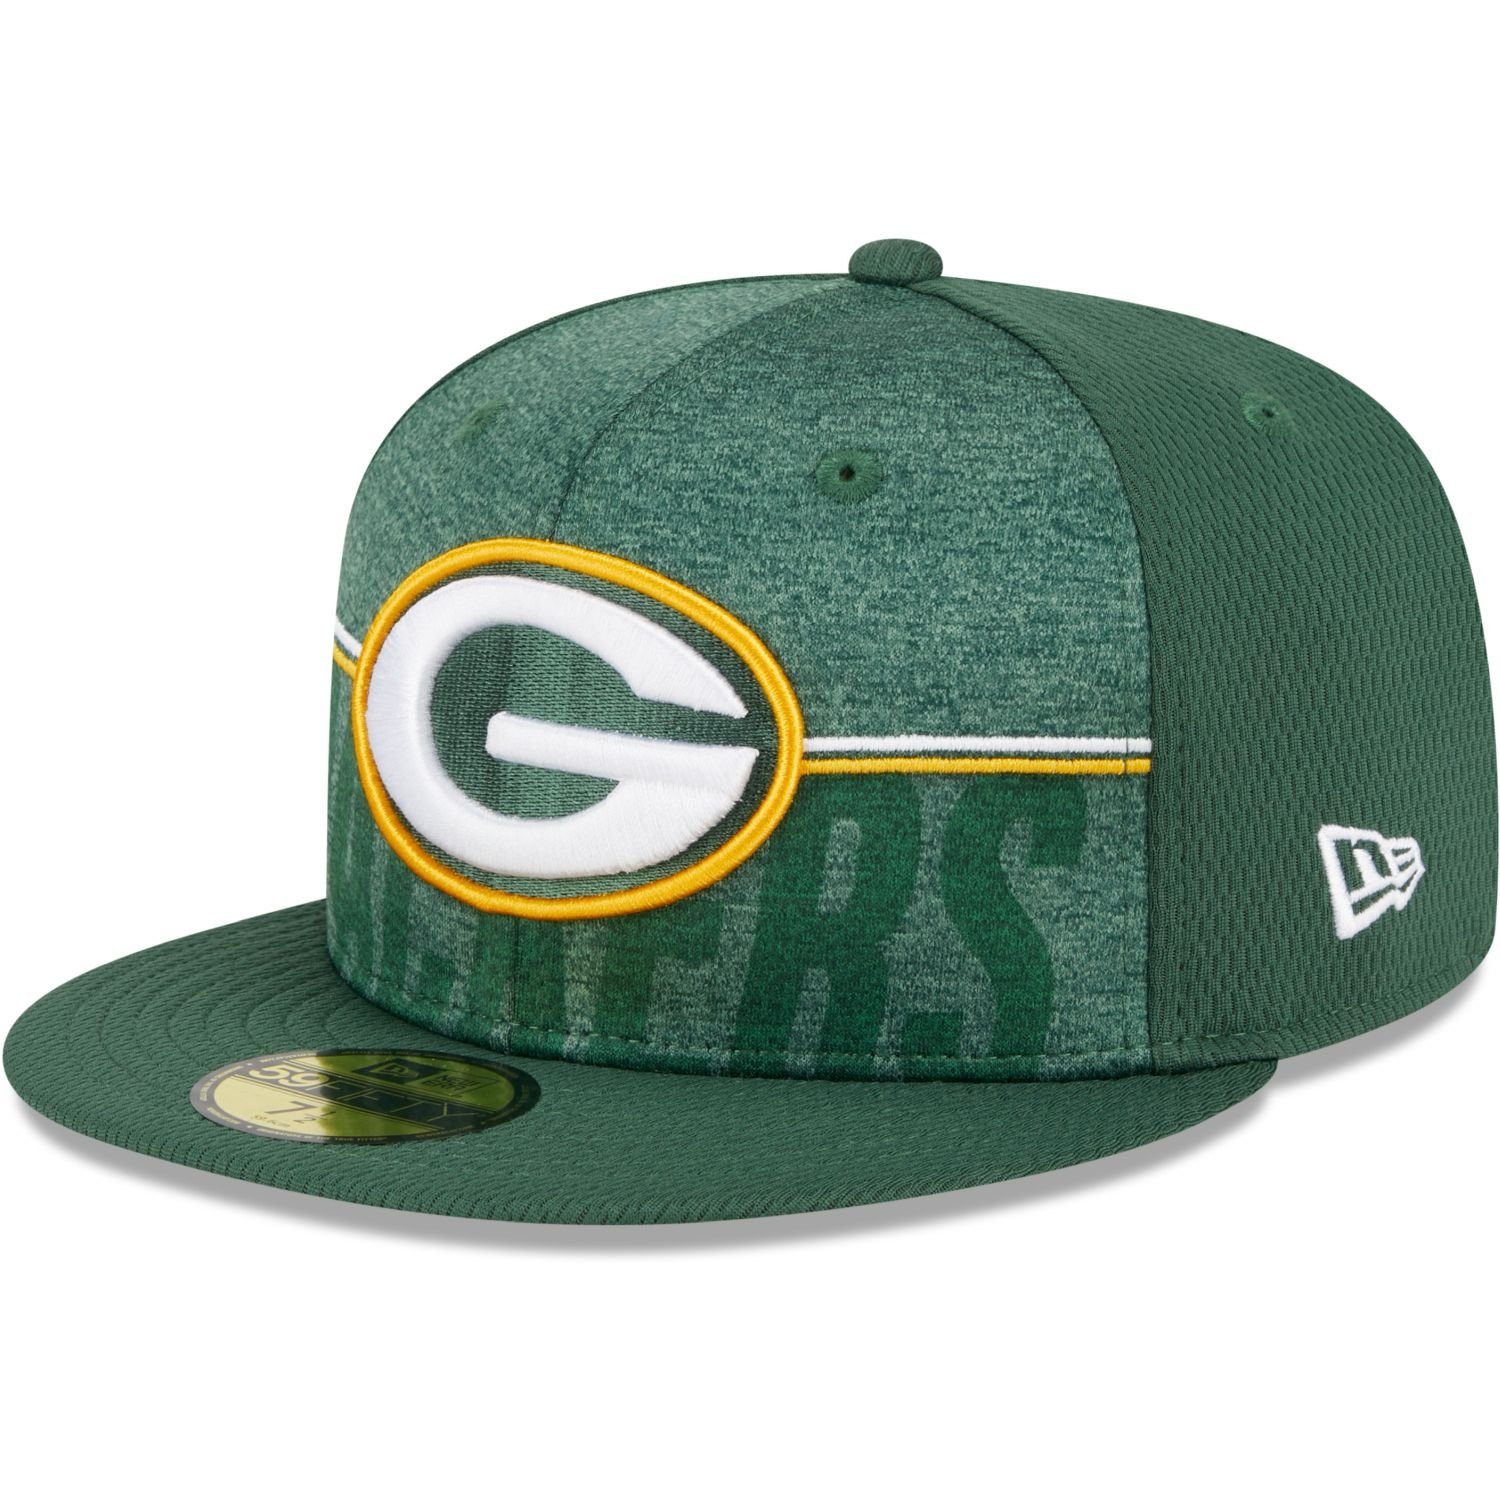 New Era Fitted Cap 59Fifty NFL TRAINING Green Bay Packers